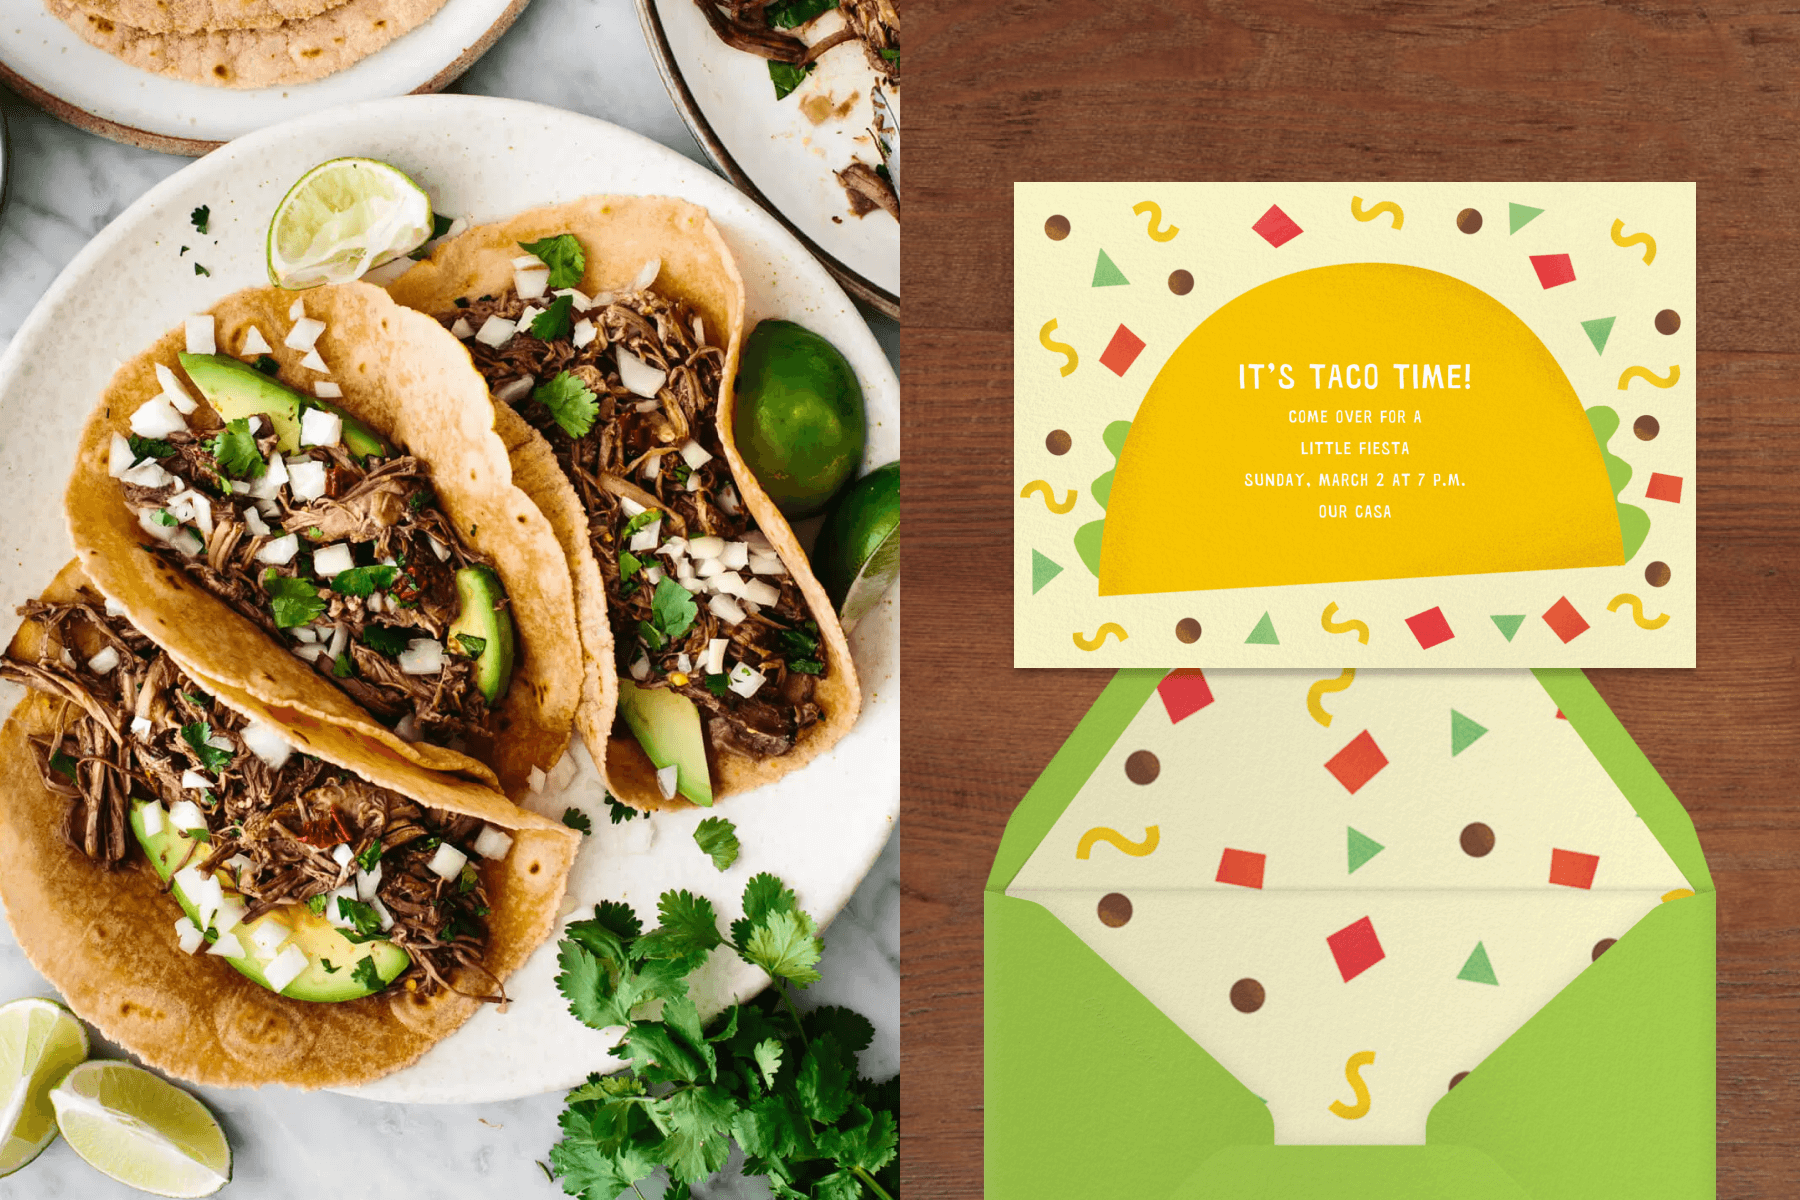 Left: A plate with three barbacoa tacos, lime pieces, and cilantro. Right: An invitation with a minimalist taco image surrounded by small geometric shapes referencing tomatoes, beans, greens, and cheese and the words “It’s taco time!”